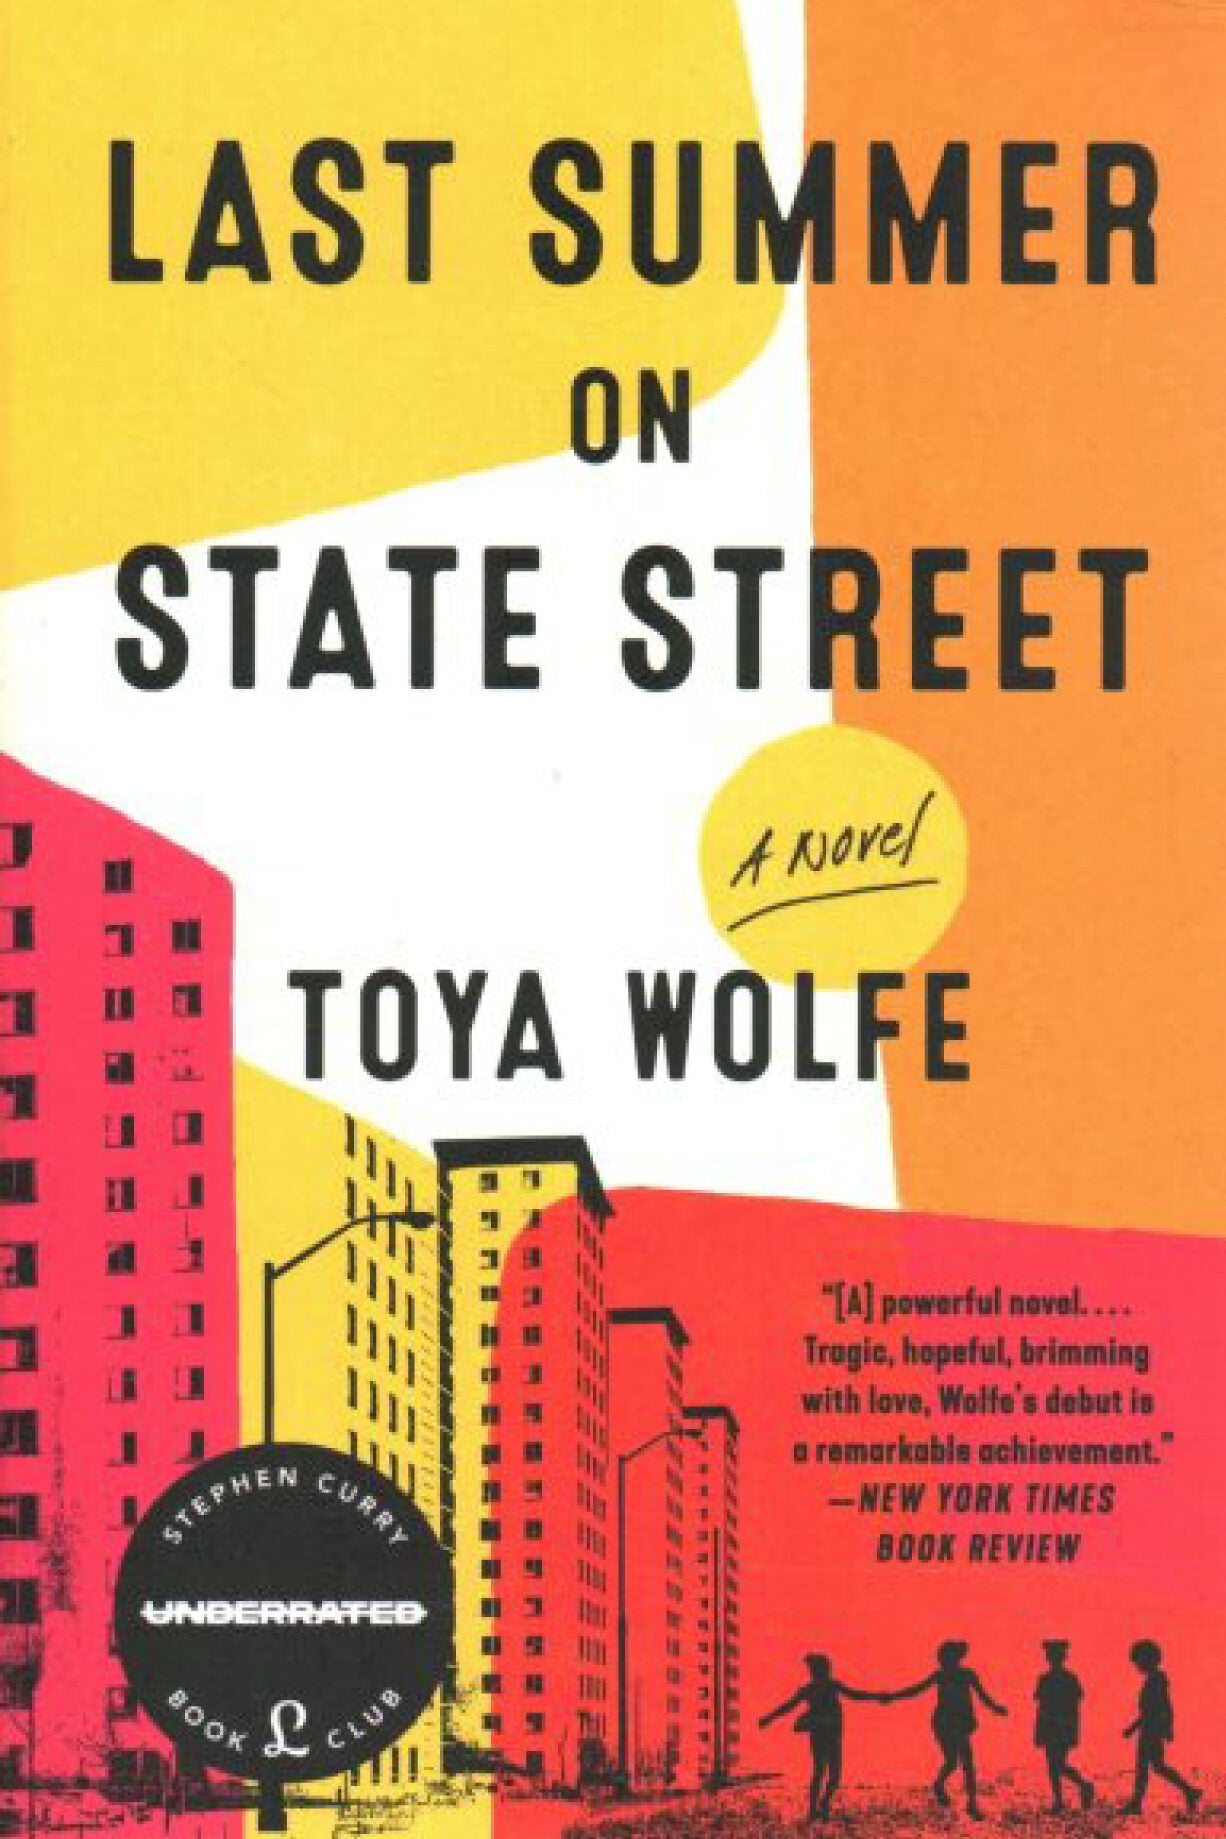 Book cover: "Last Summer on State Street."